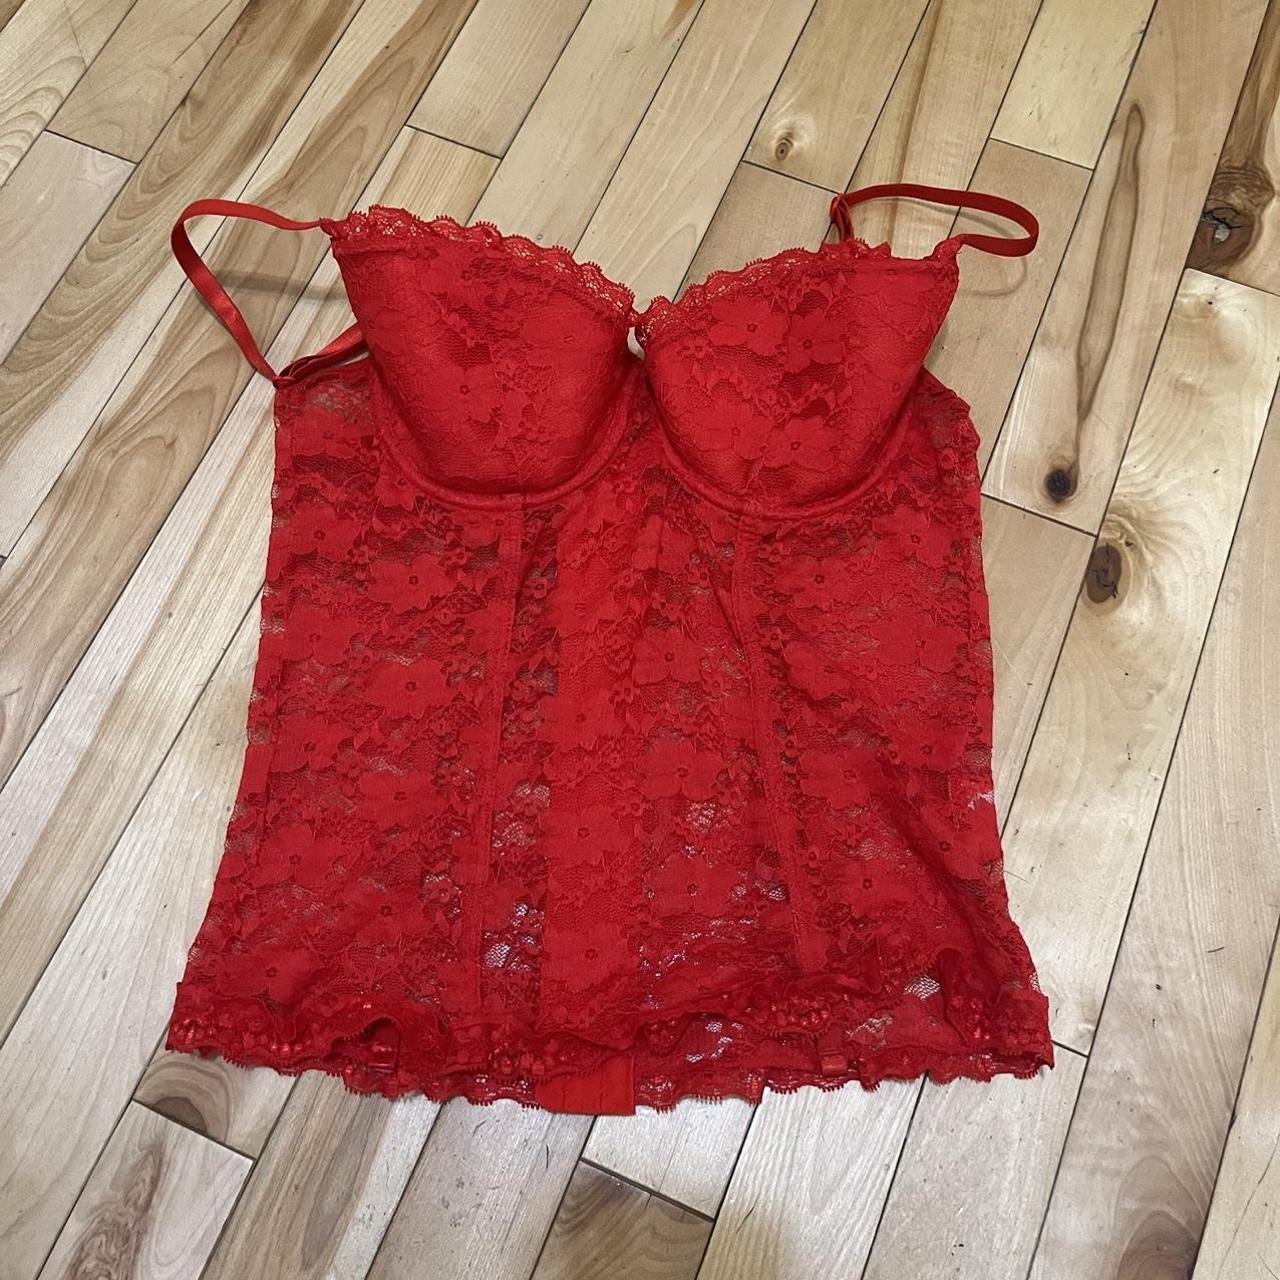 GORGEOUS RED LACE CORSET!!! Bust part has lining and... - Depop